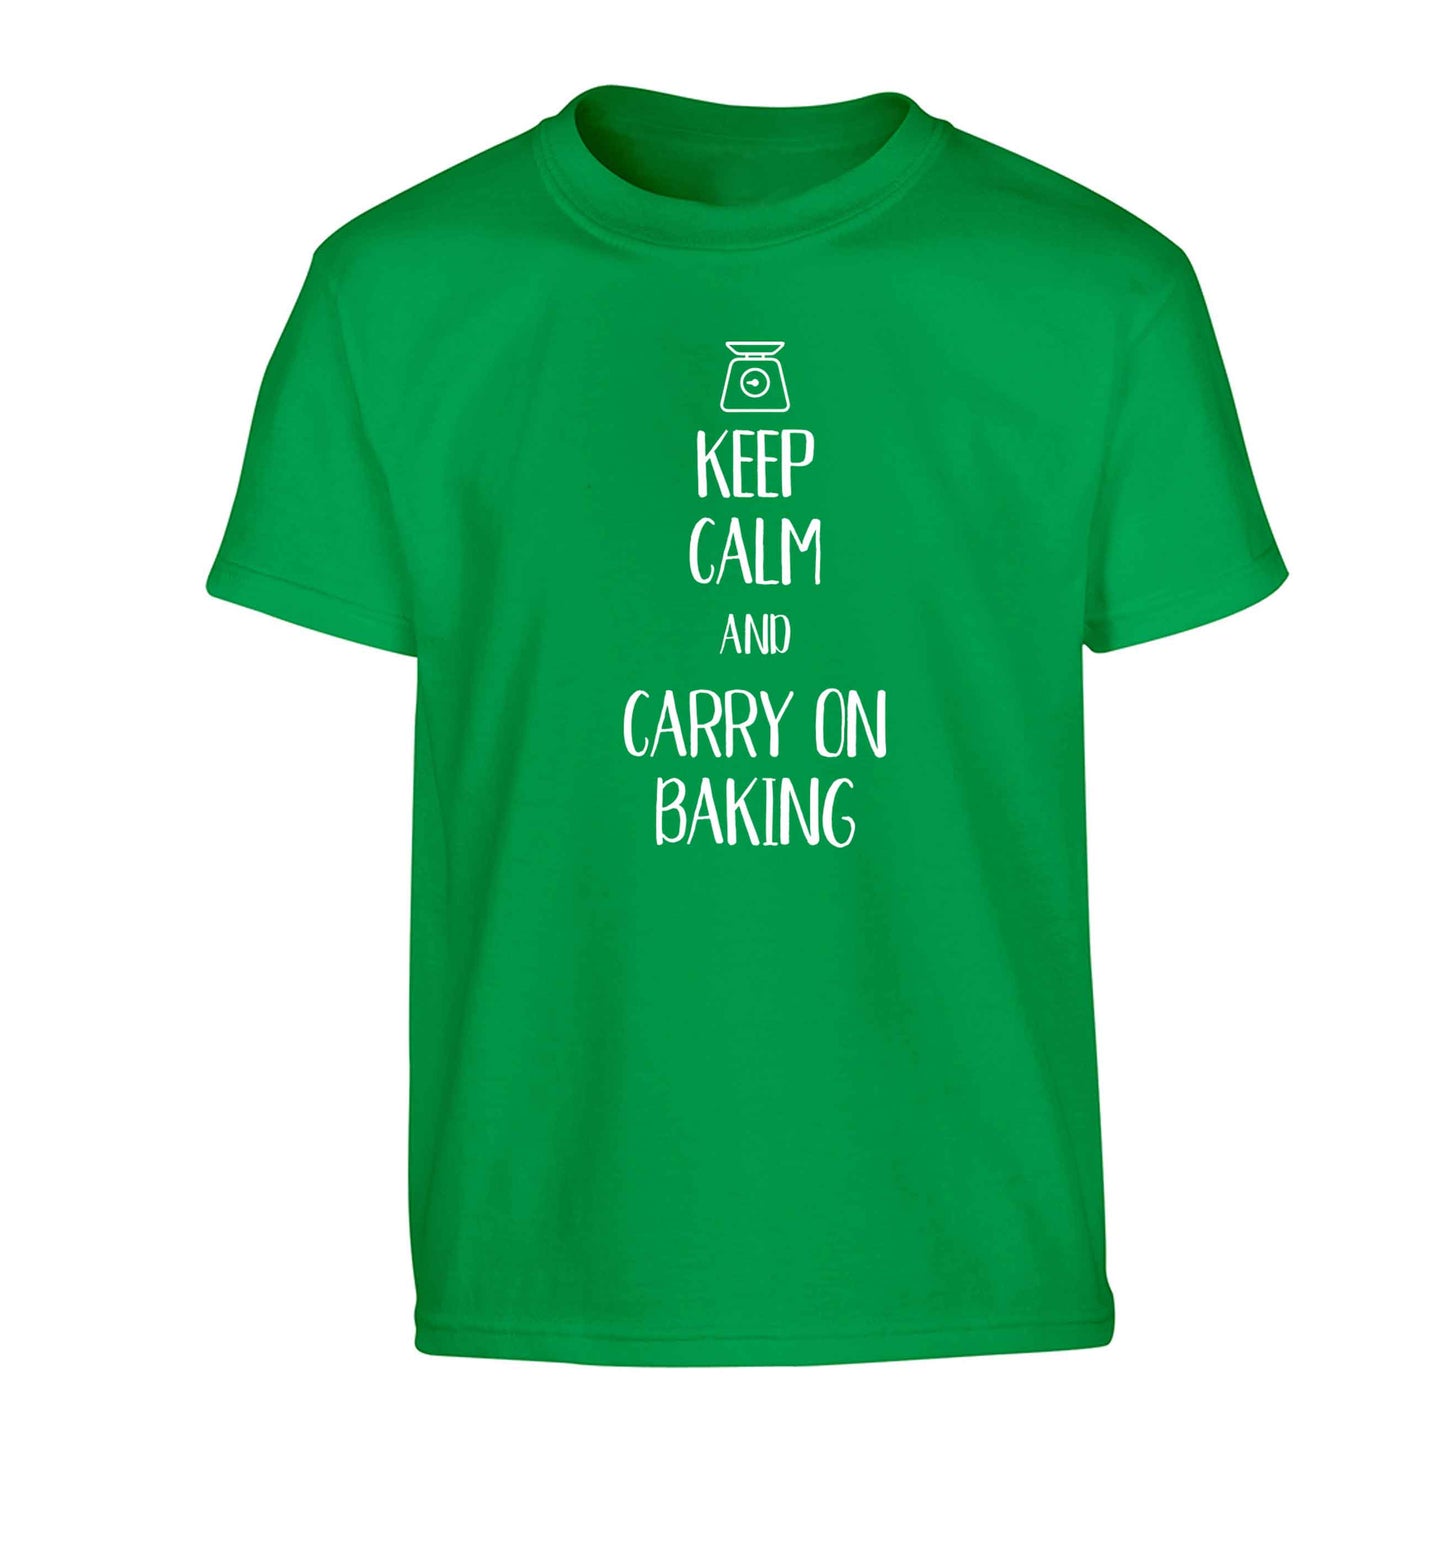 Keep calm and carry on baking Children's green Tshirt 12-13 Years